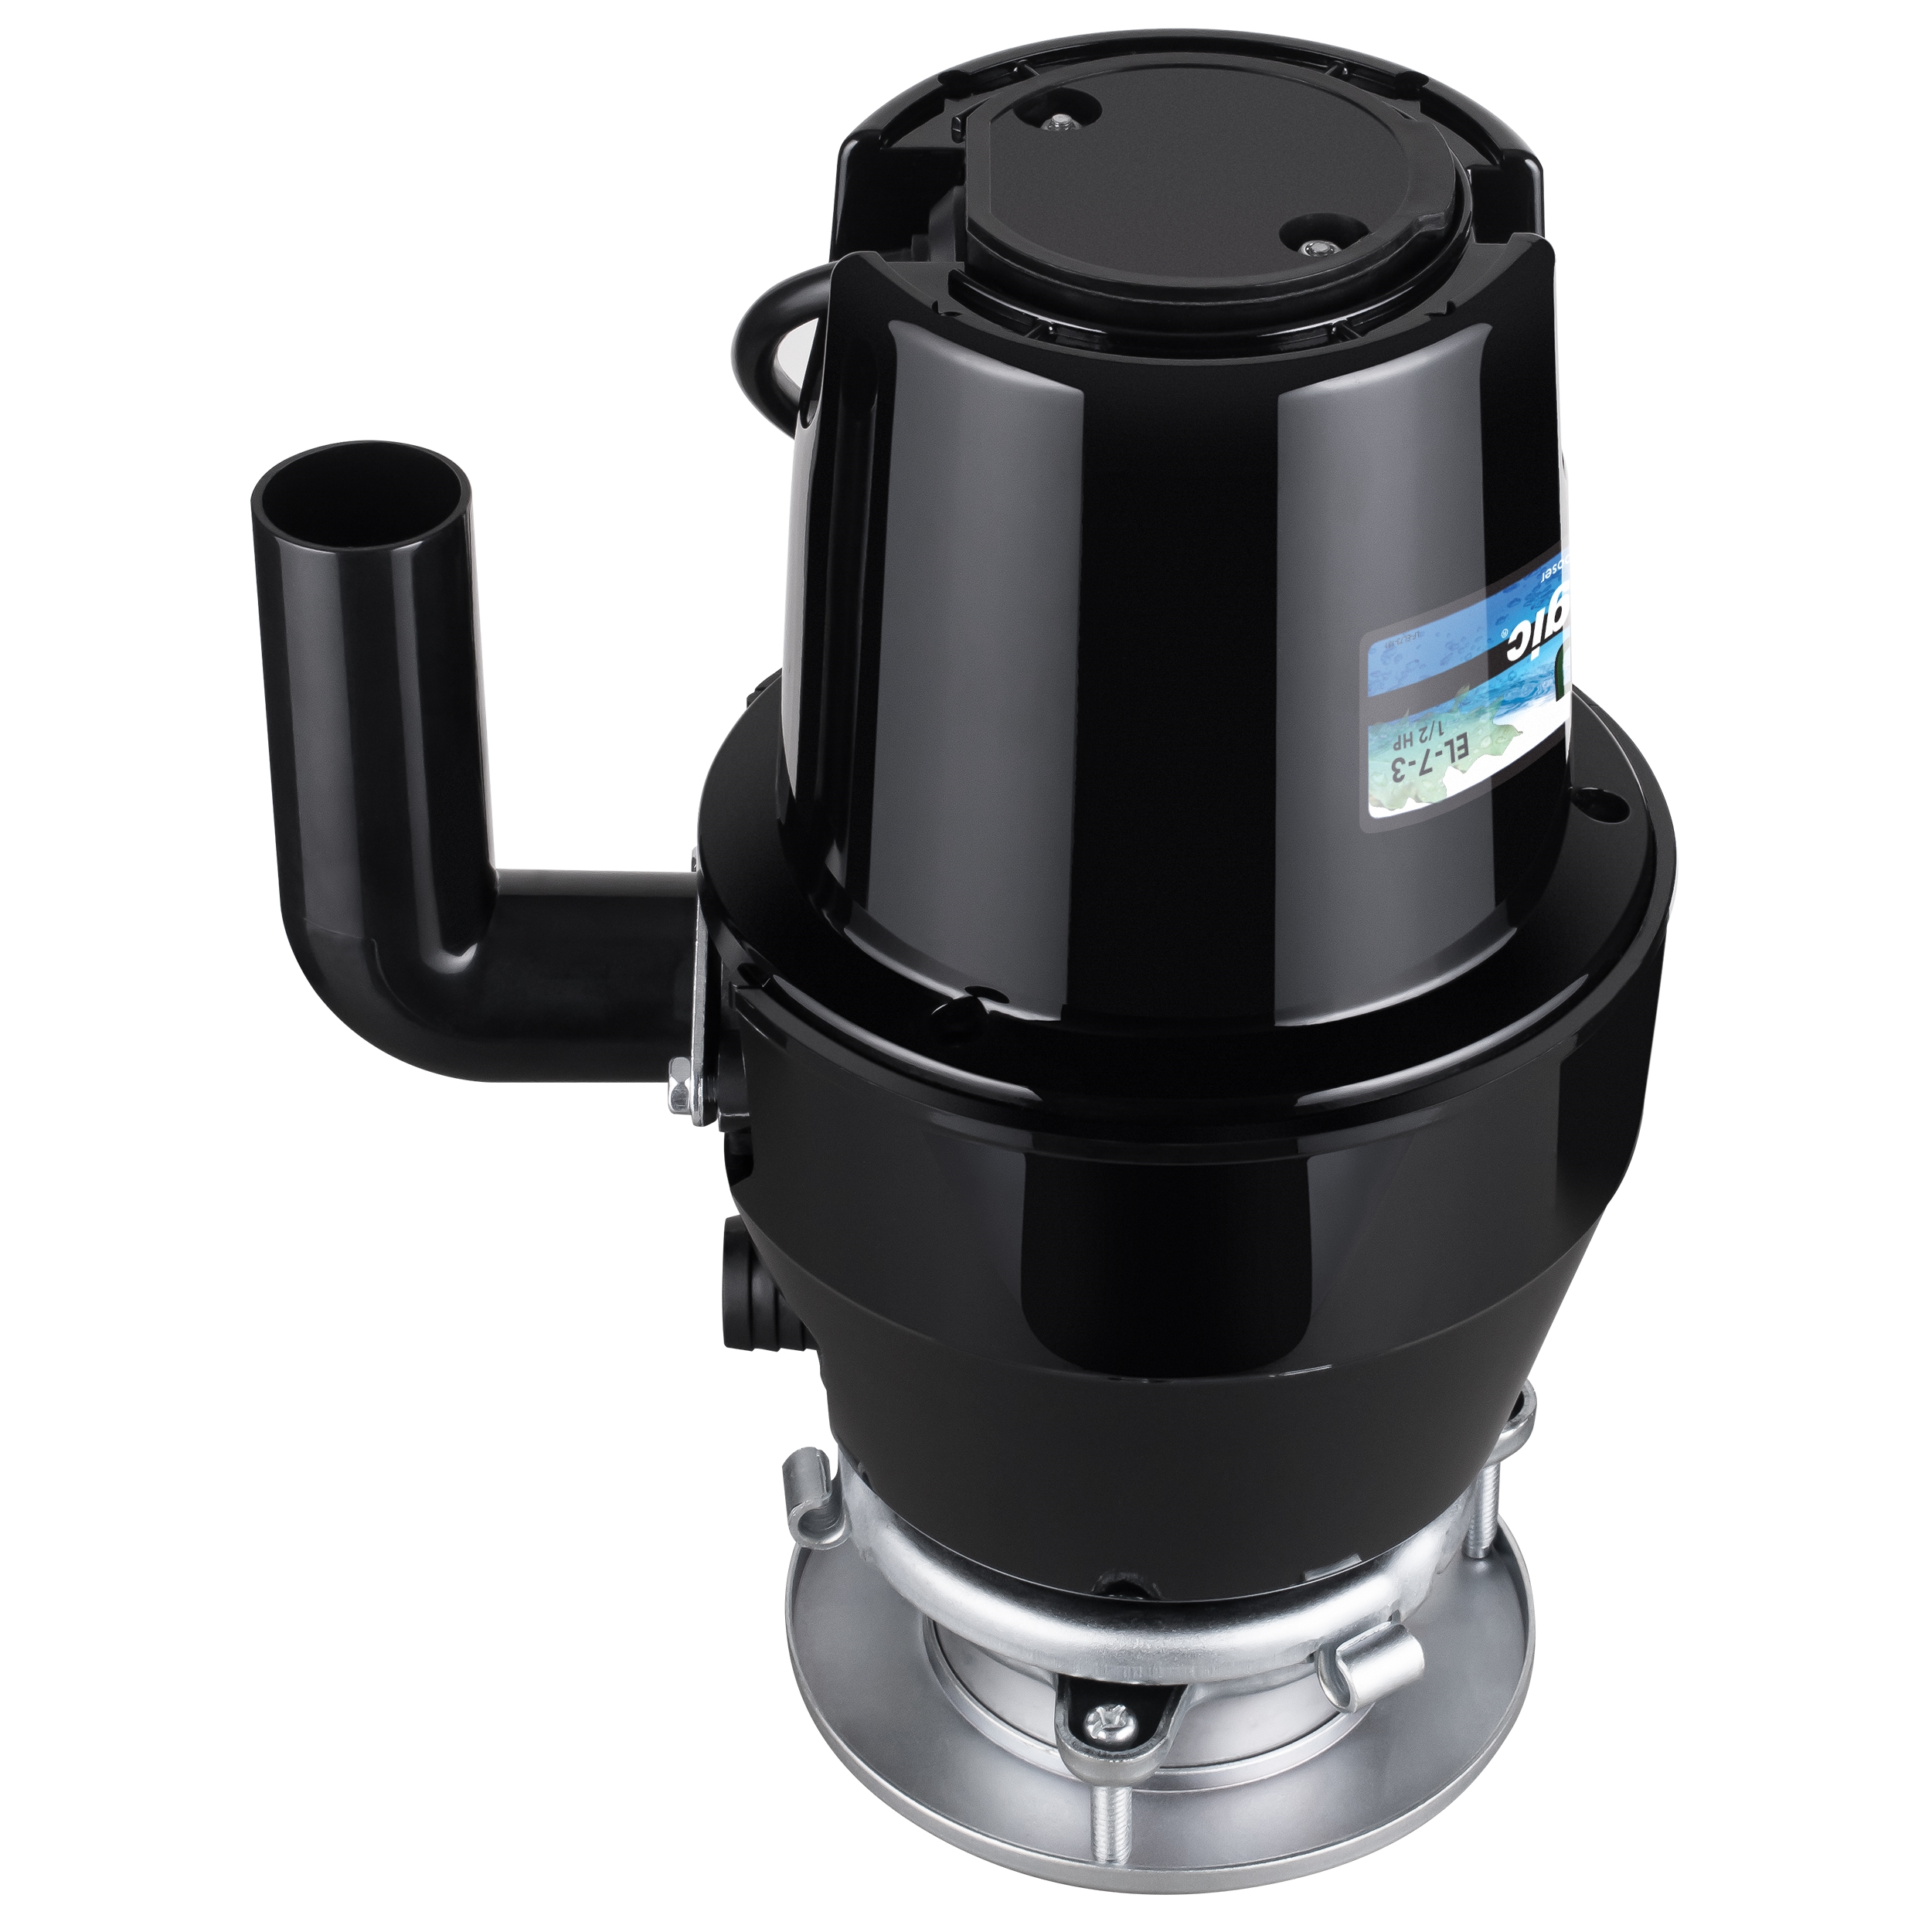 Waste Maid 1/3 HP Garbage Disposal, Includes Attached Power Cord 10-US-WM- 048-3B